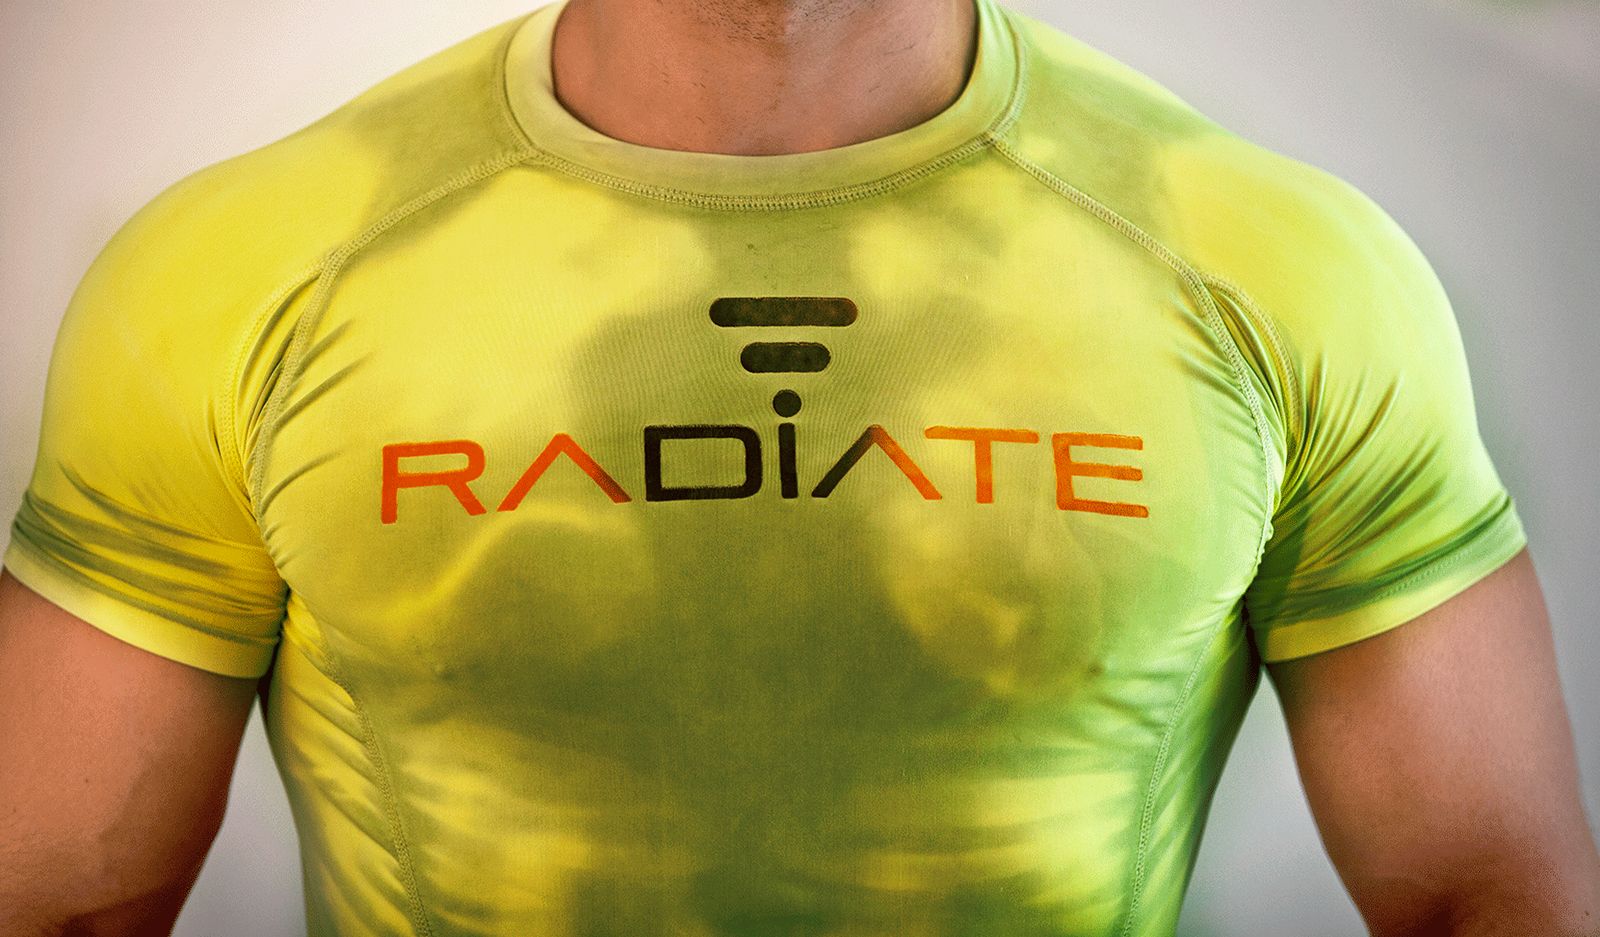 sports and fitness wearables to look forward to in 2015 image 15